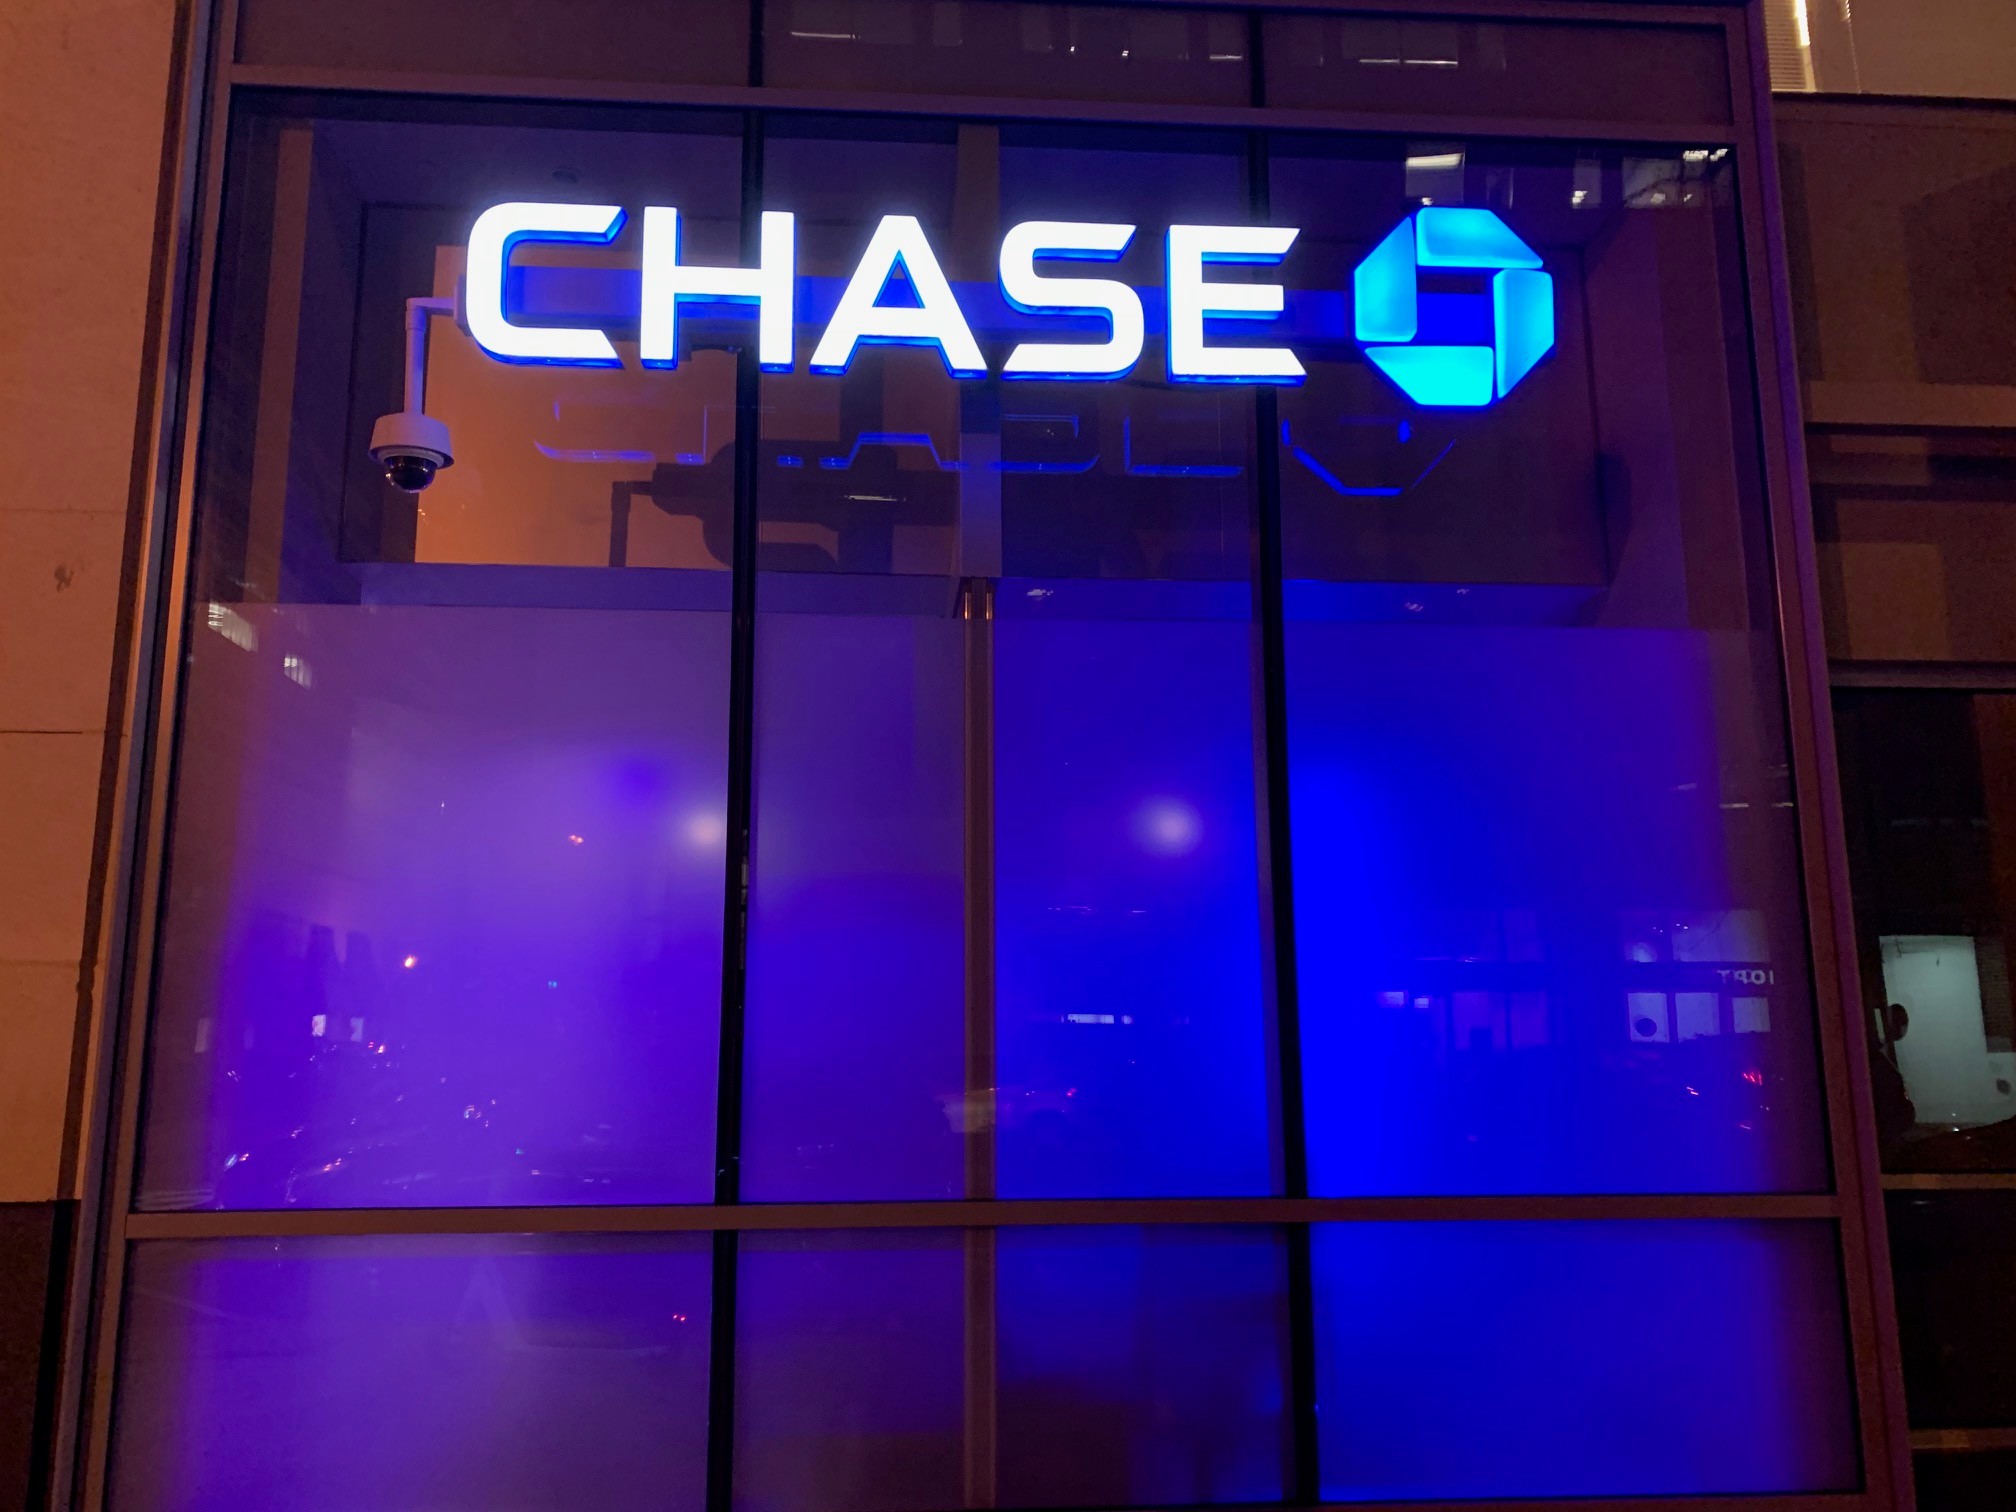 $900 Offers for Chase Ink Cards